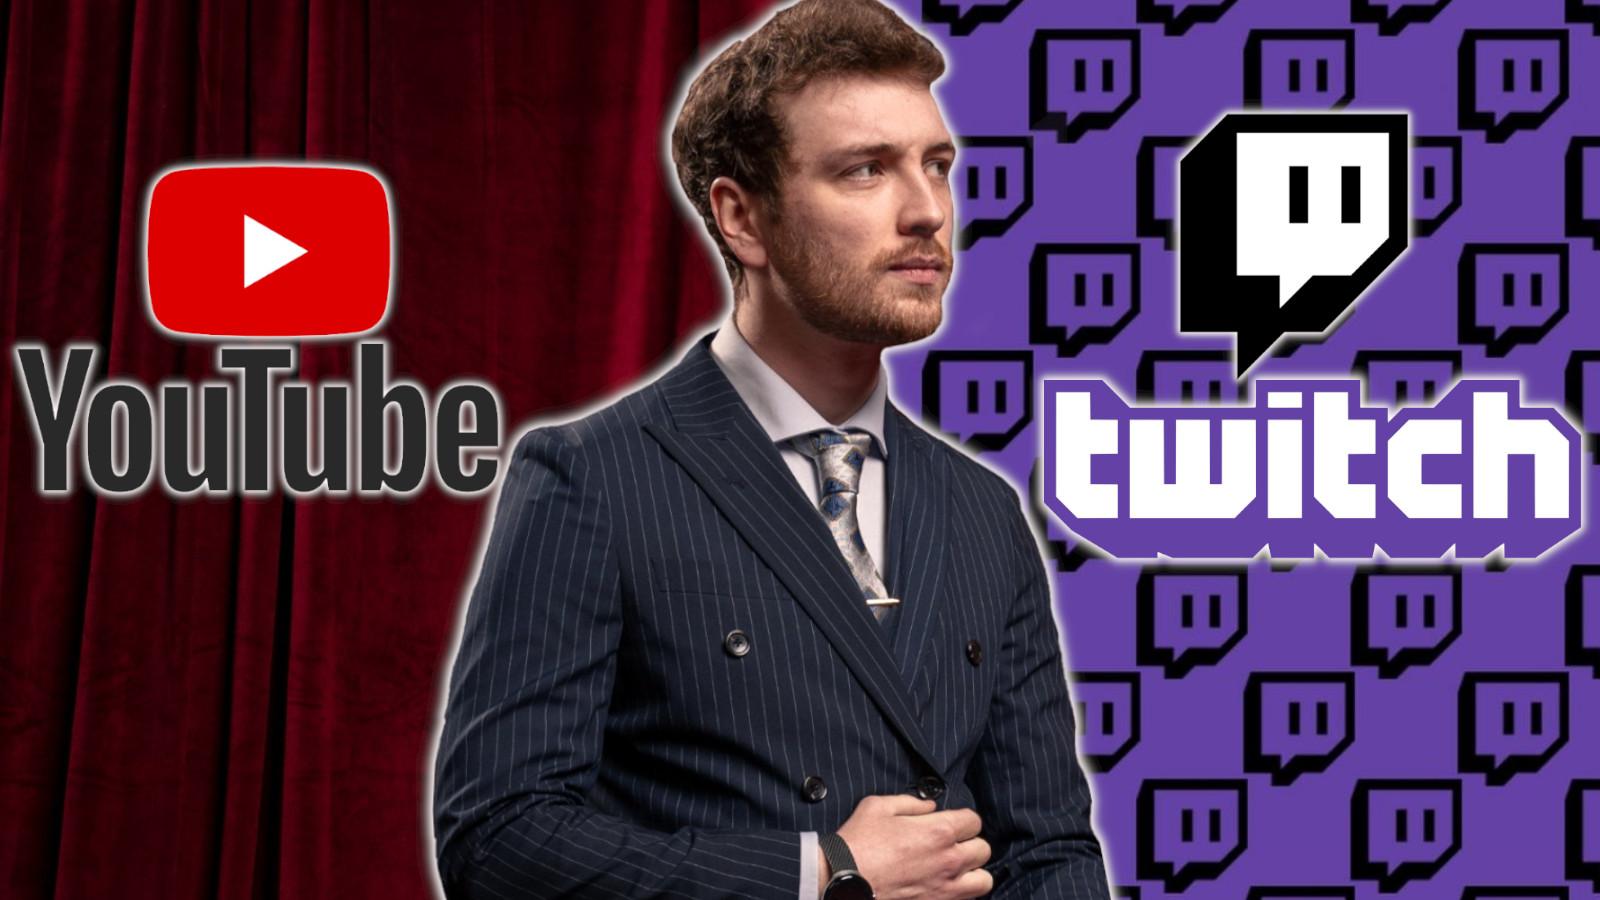 Connor opens up about his journey from niche Youtuber to Twitch superstar